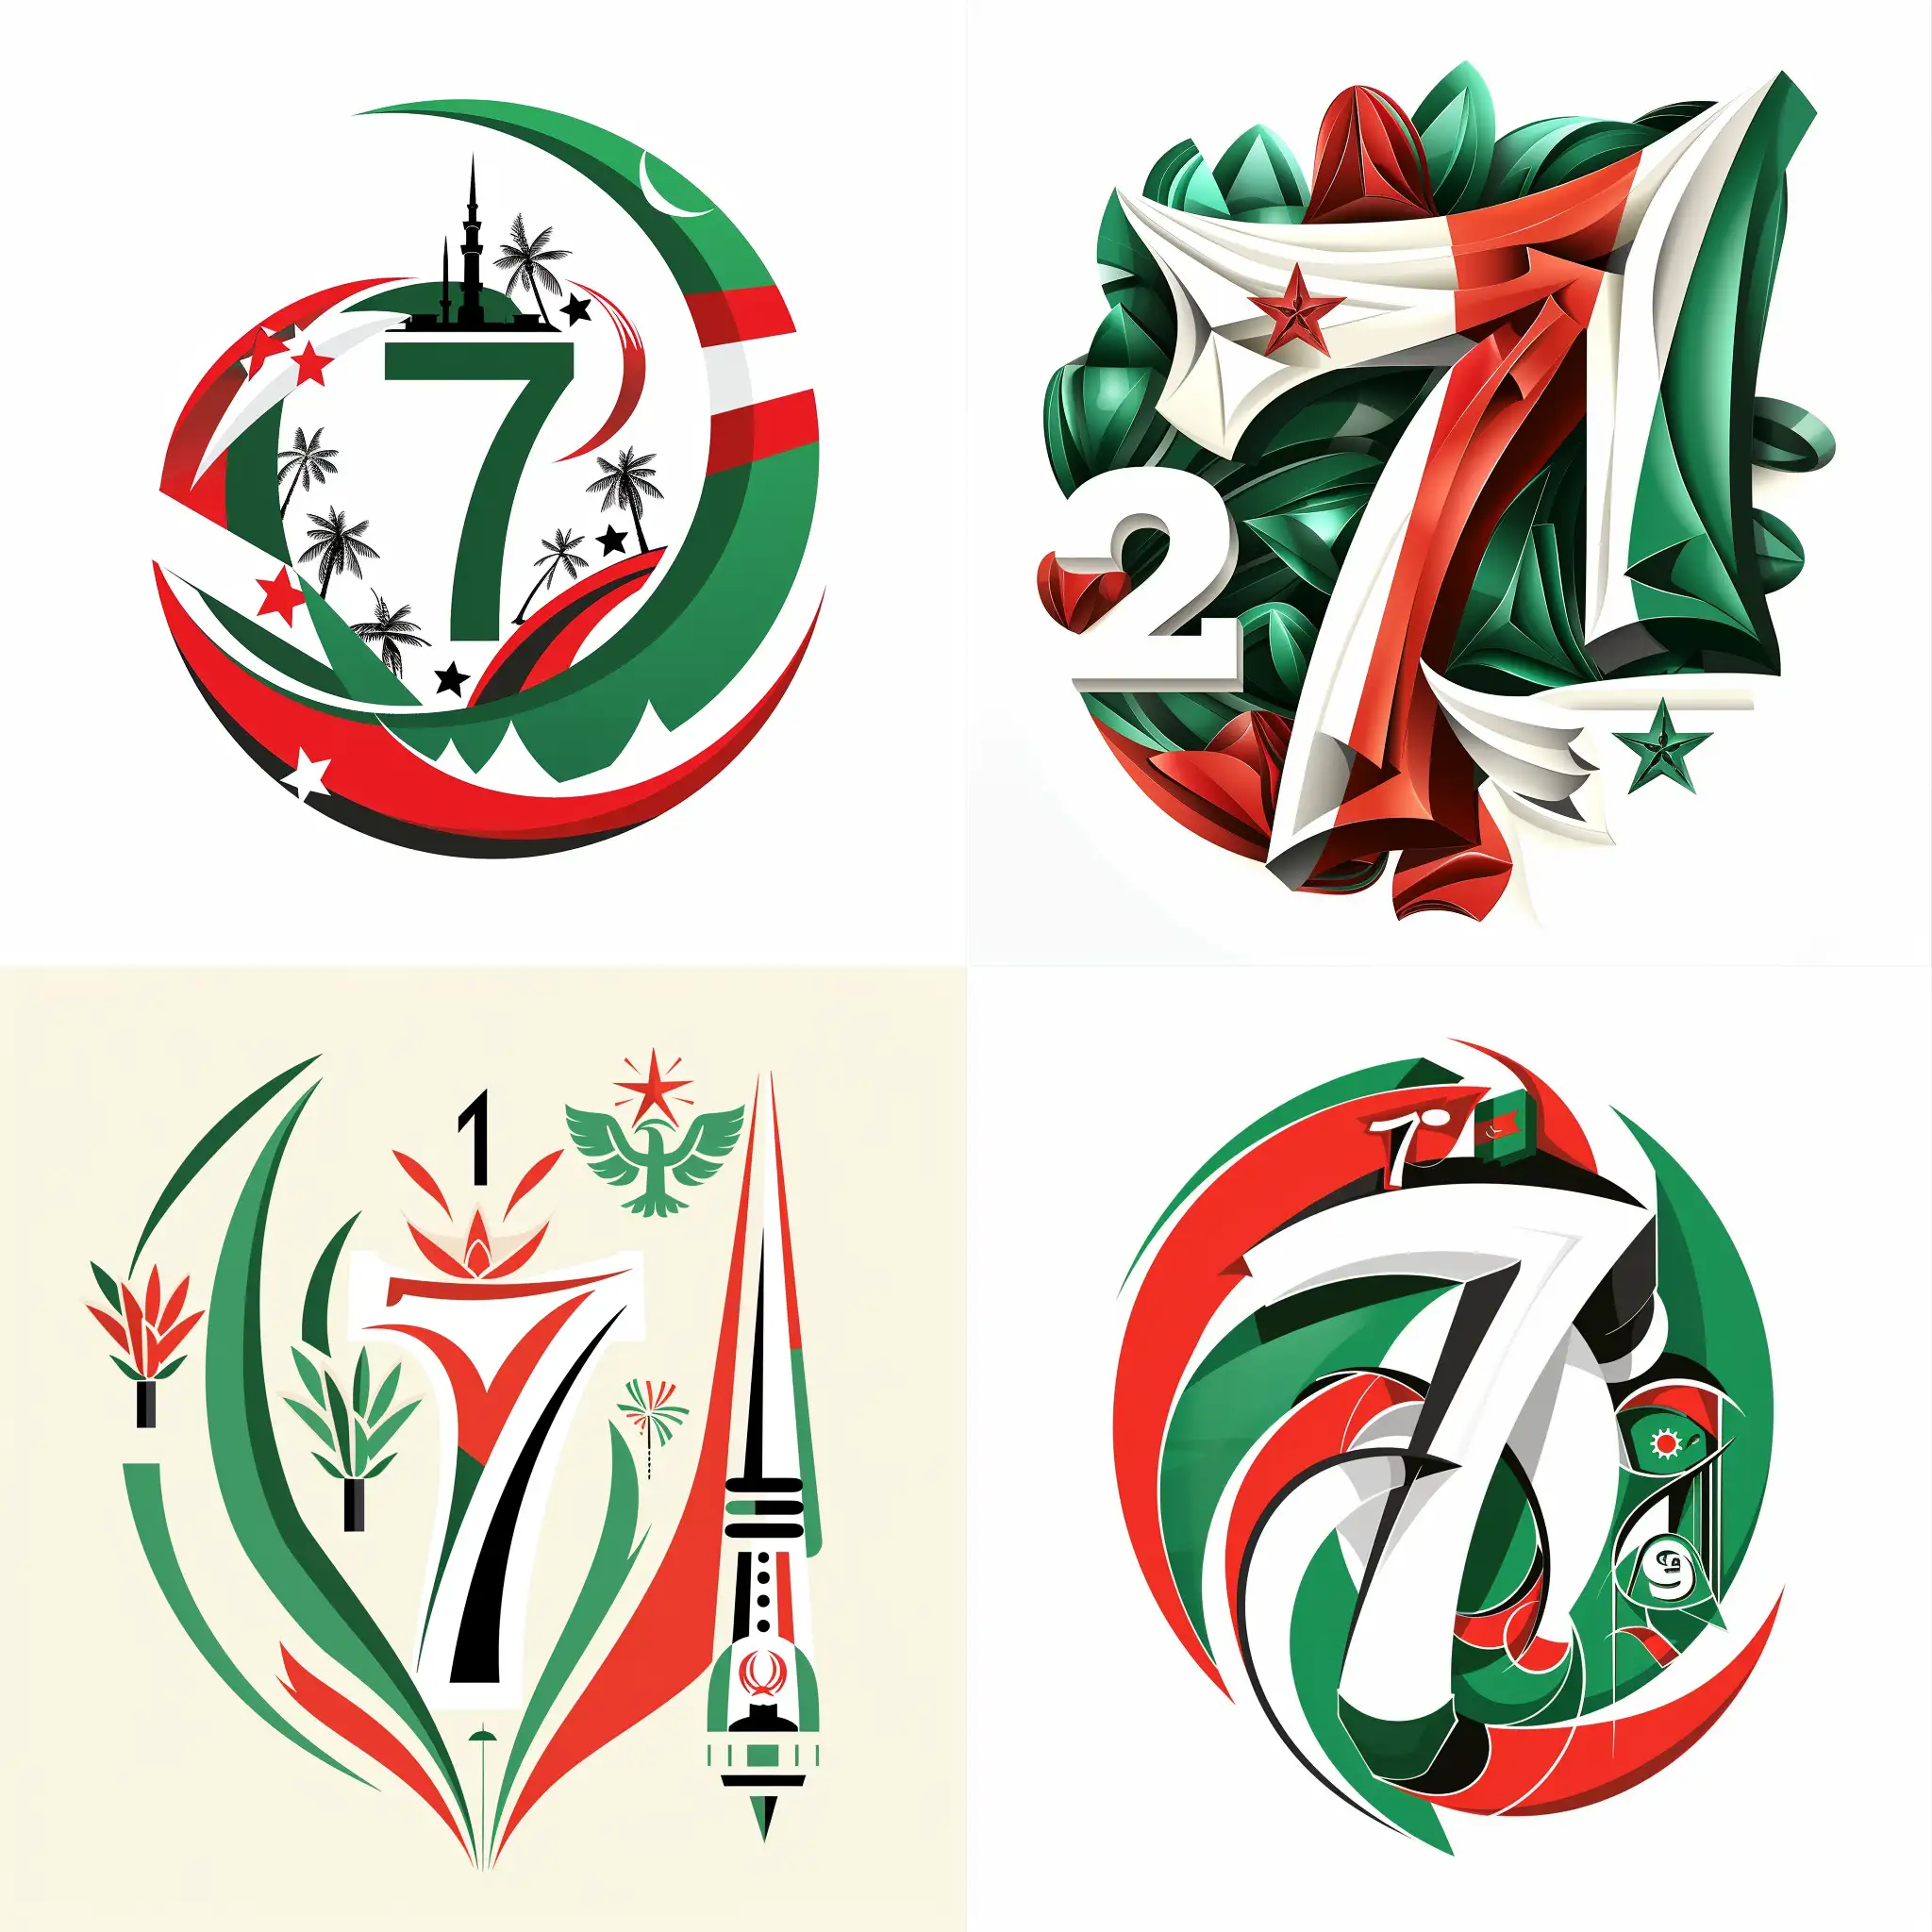 Make me a special vector logo for the seventieth anniversary of the glorious Liberation Revolution Day, November 1, 1954, Algeria, so that the logo includes the number seventy and symbols of the struggle, and it is in the colors white, red, and green 